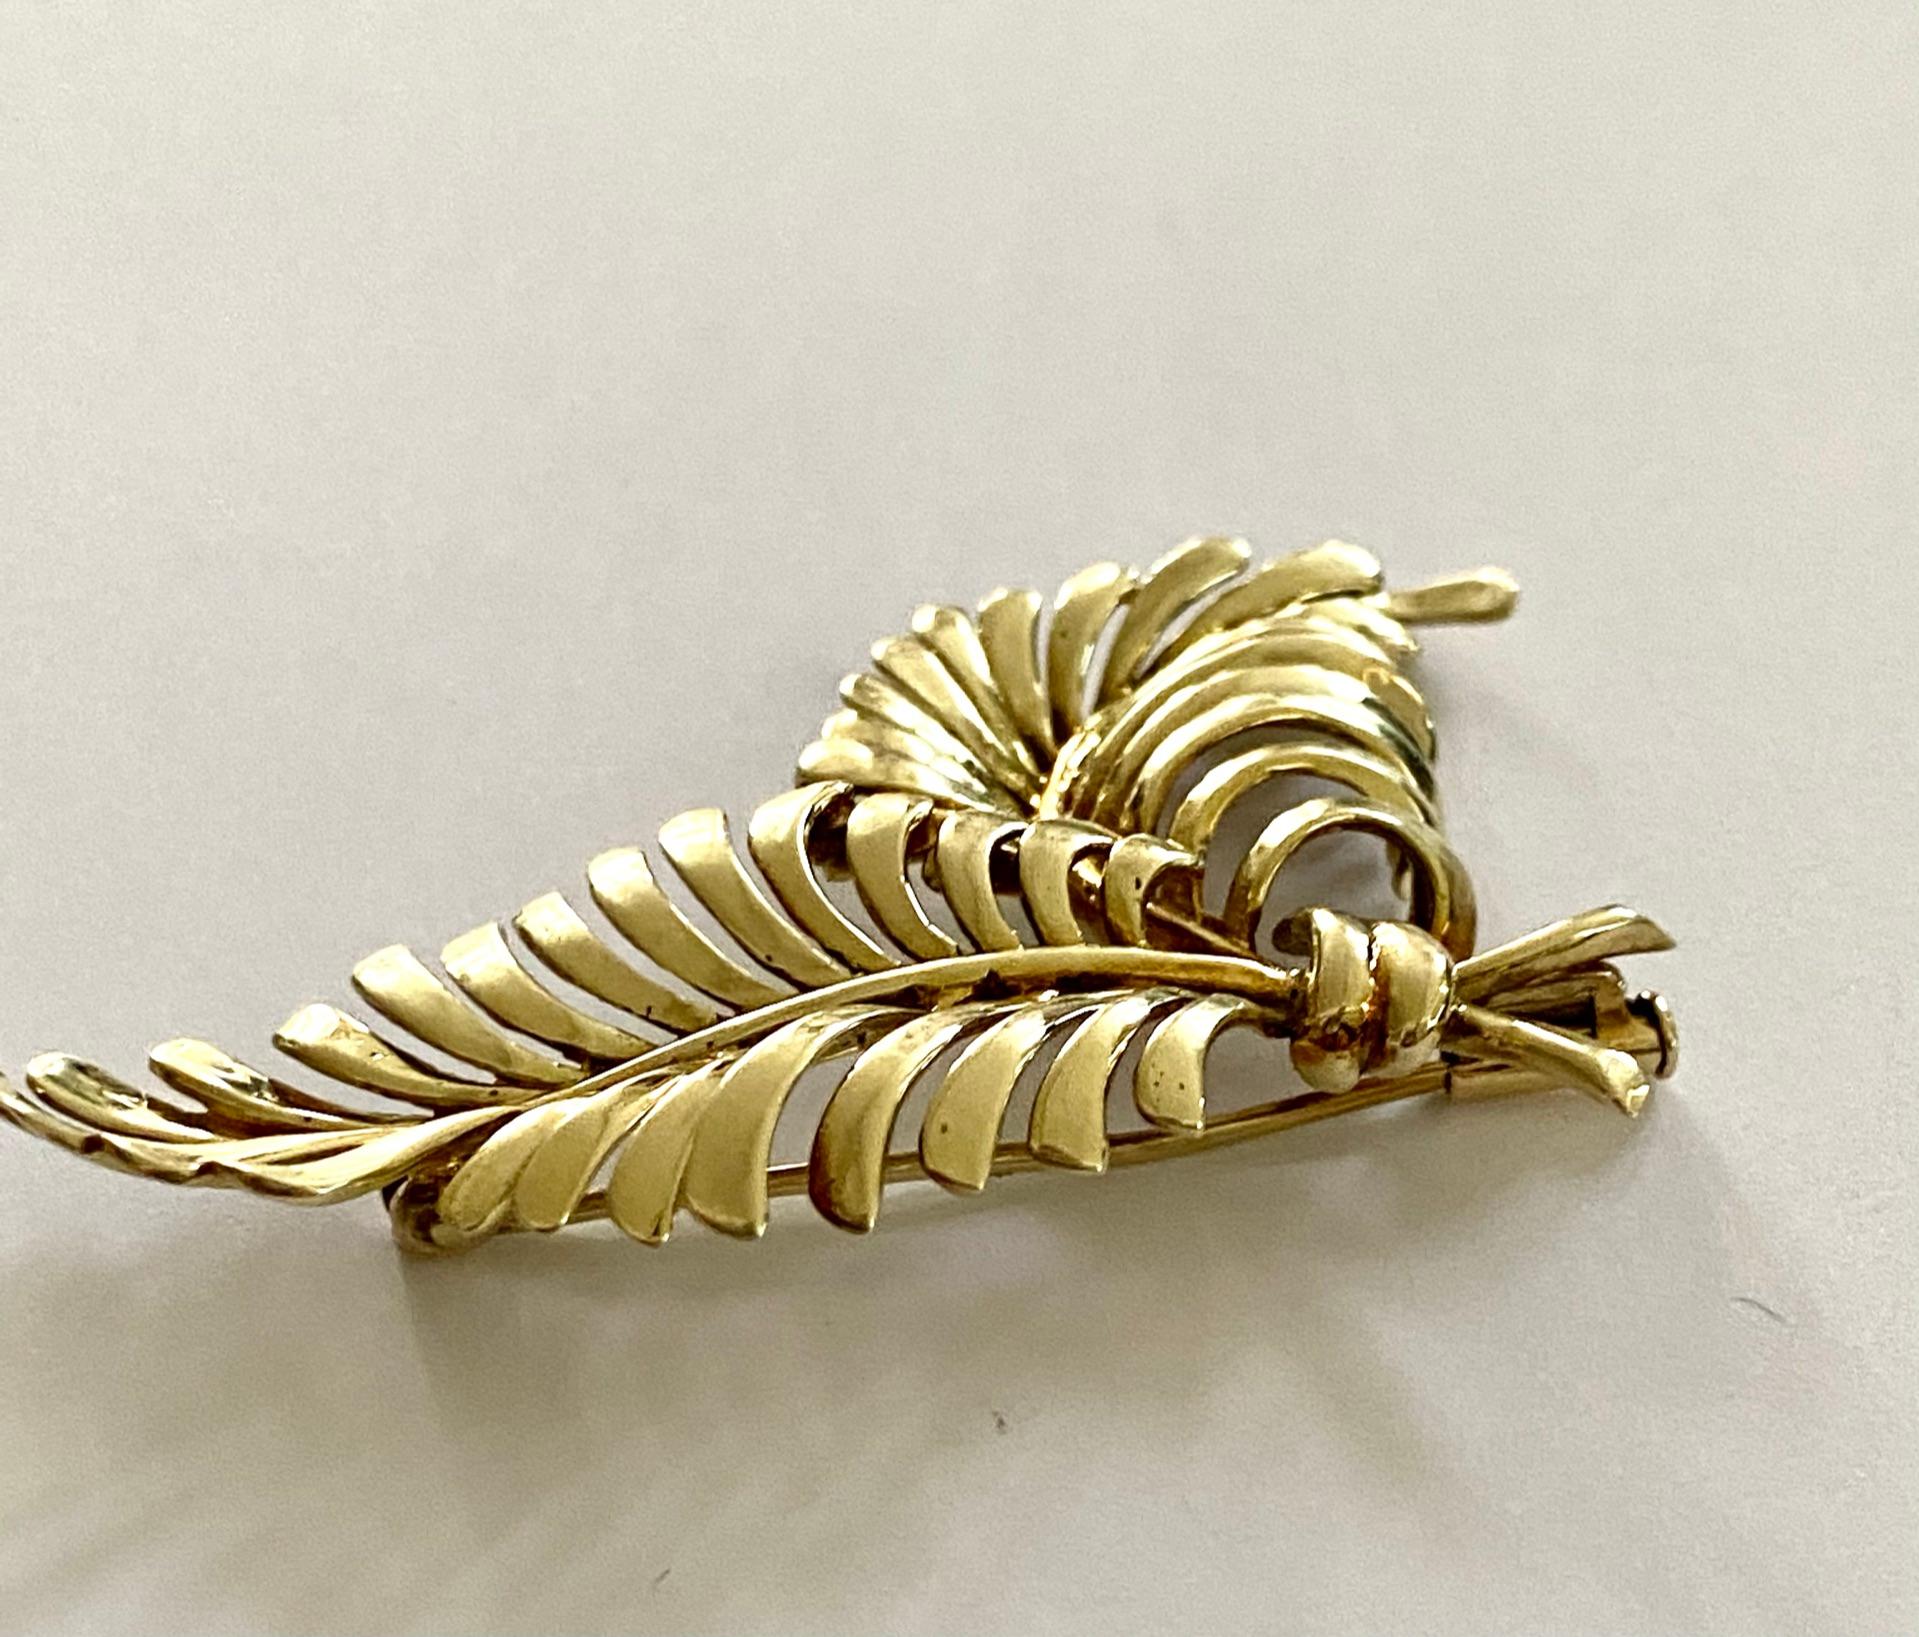 One (1) 14 Karat  Yellow Gold Brooch, stamped 585 and GVK = Fa. Gerritsen & van Kempen Zeist
Made in Holland ca 1955
2 Palm leafs.
weight: 12.67 grams.
Measserements:  55 x 54  x 5 mm
Gerritsen & van Kempen was in Holland a leading firm in making